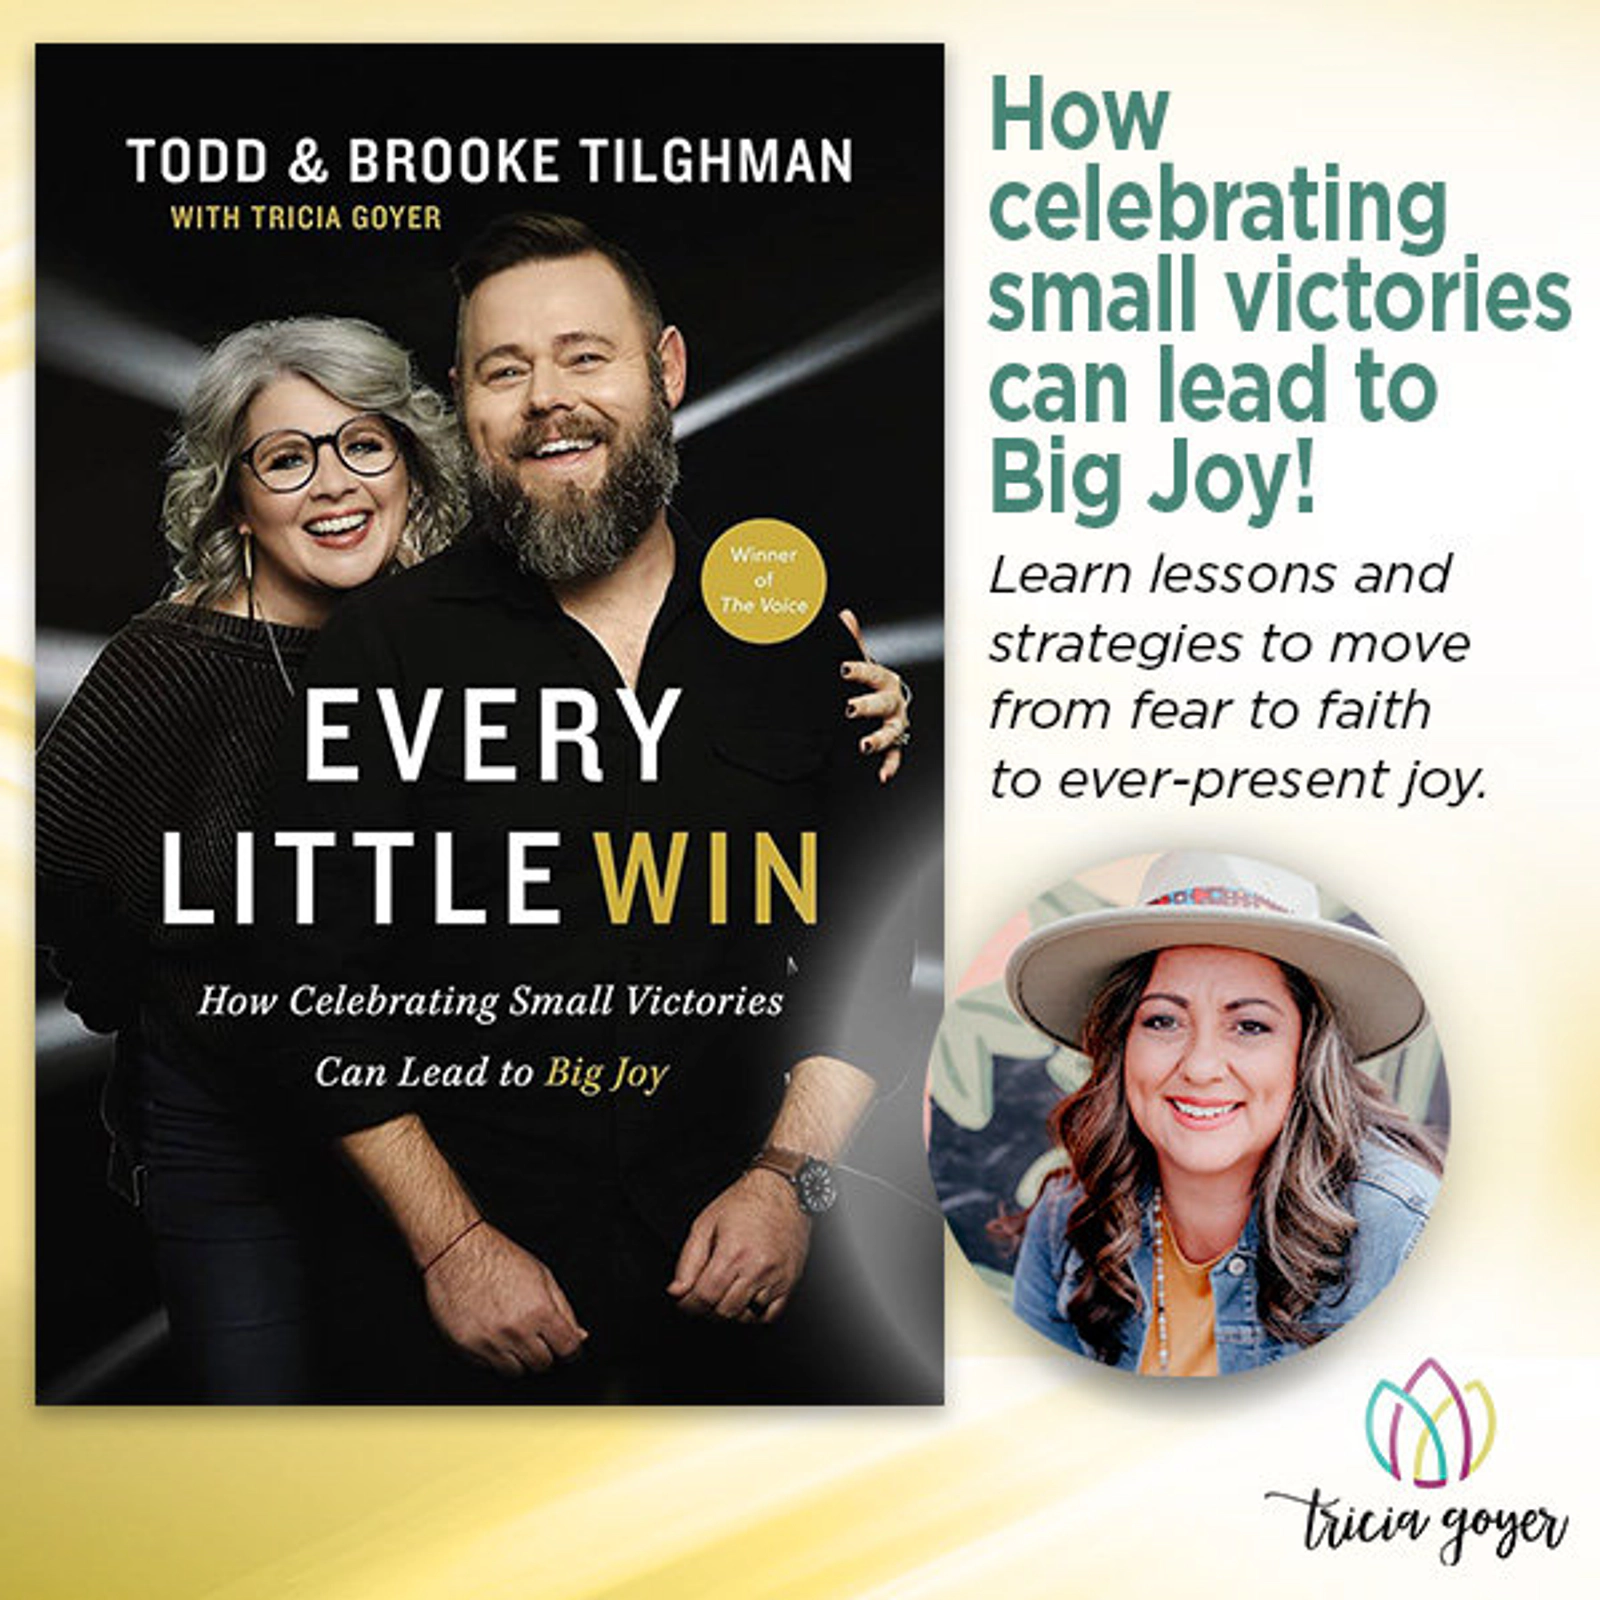 Every Little Win Book Giveaway